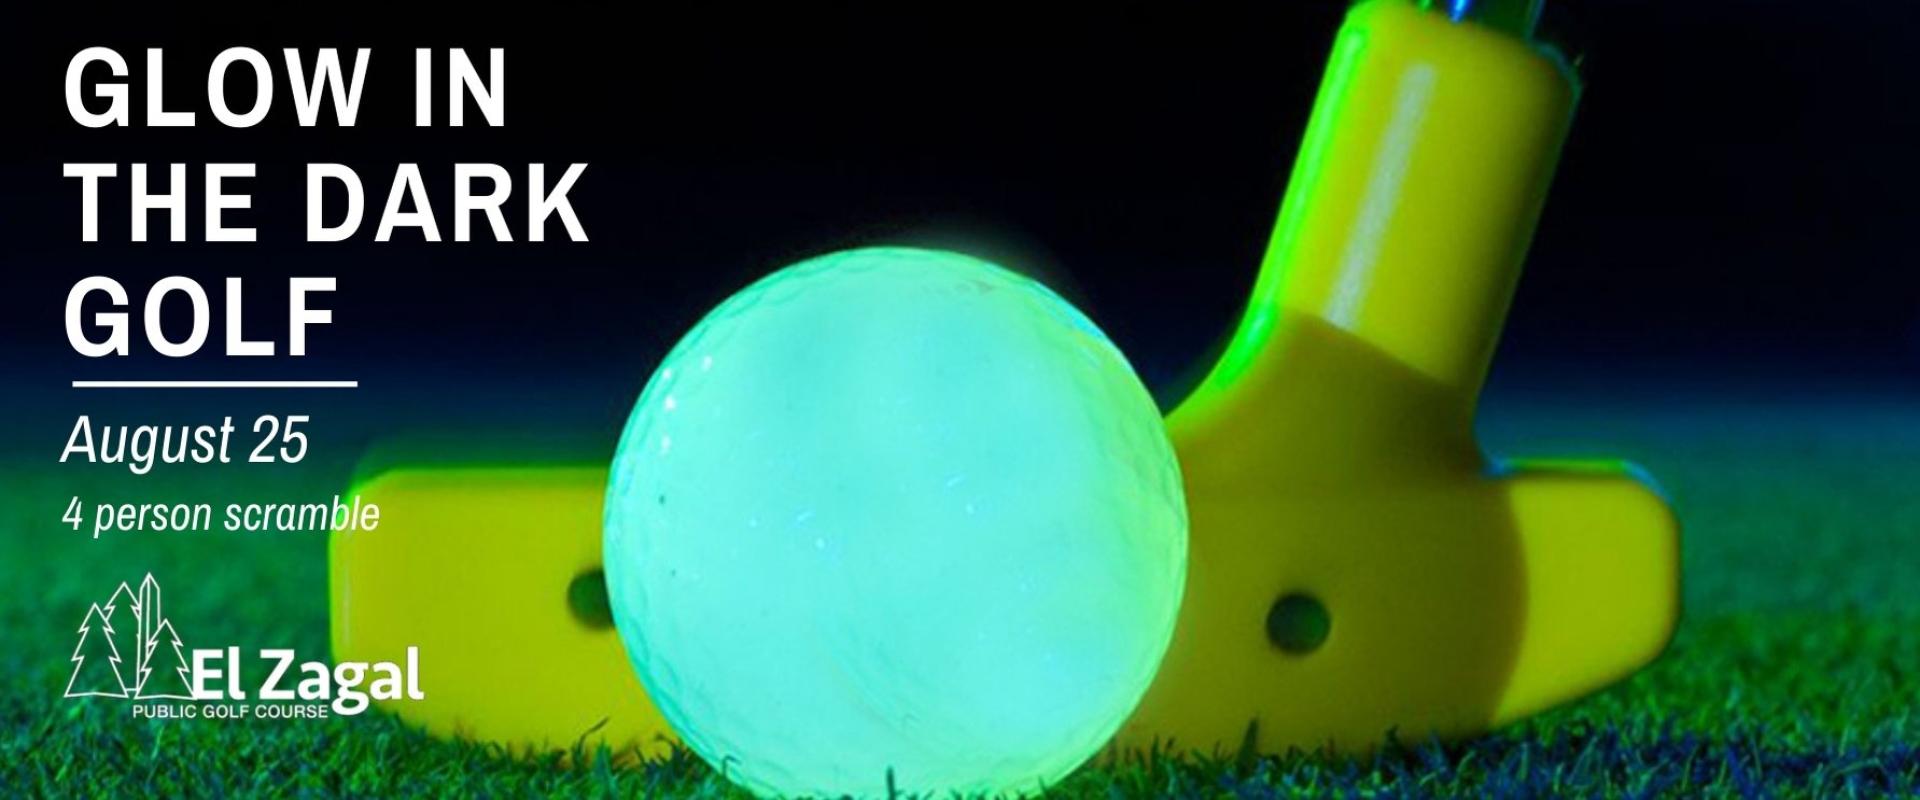 glow in the dark golf ball with text that reads glow in the dark golf August 25, four person scramble